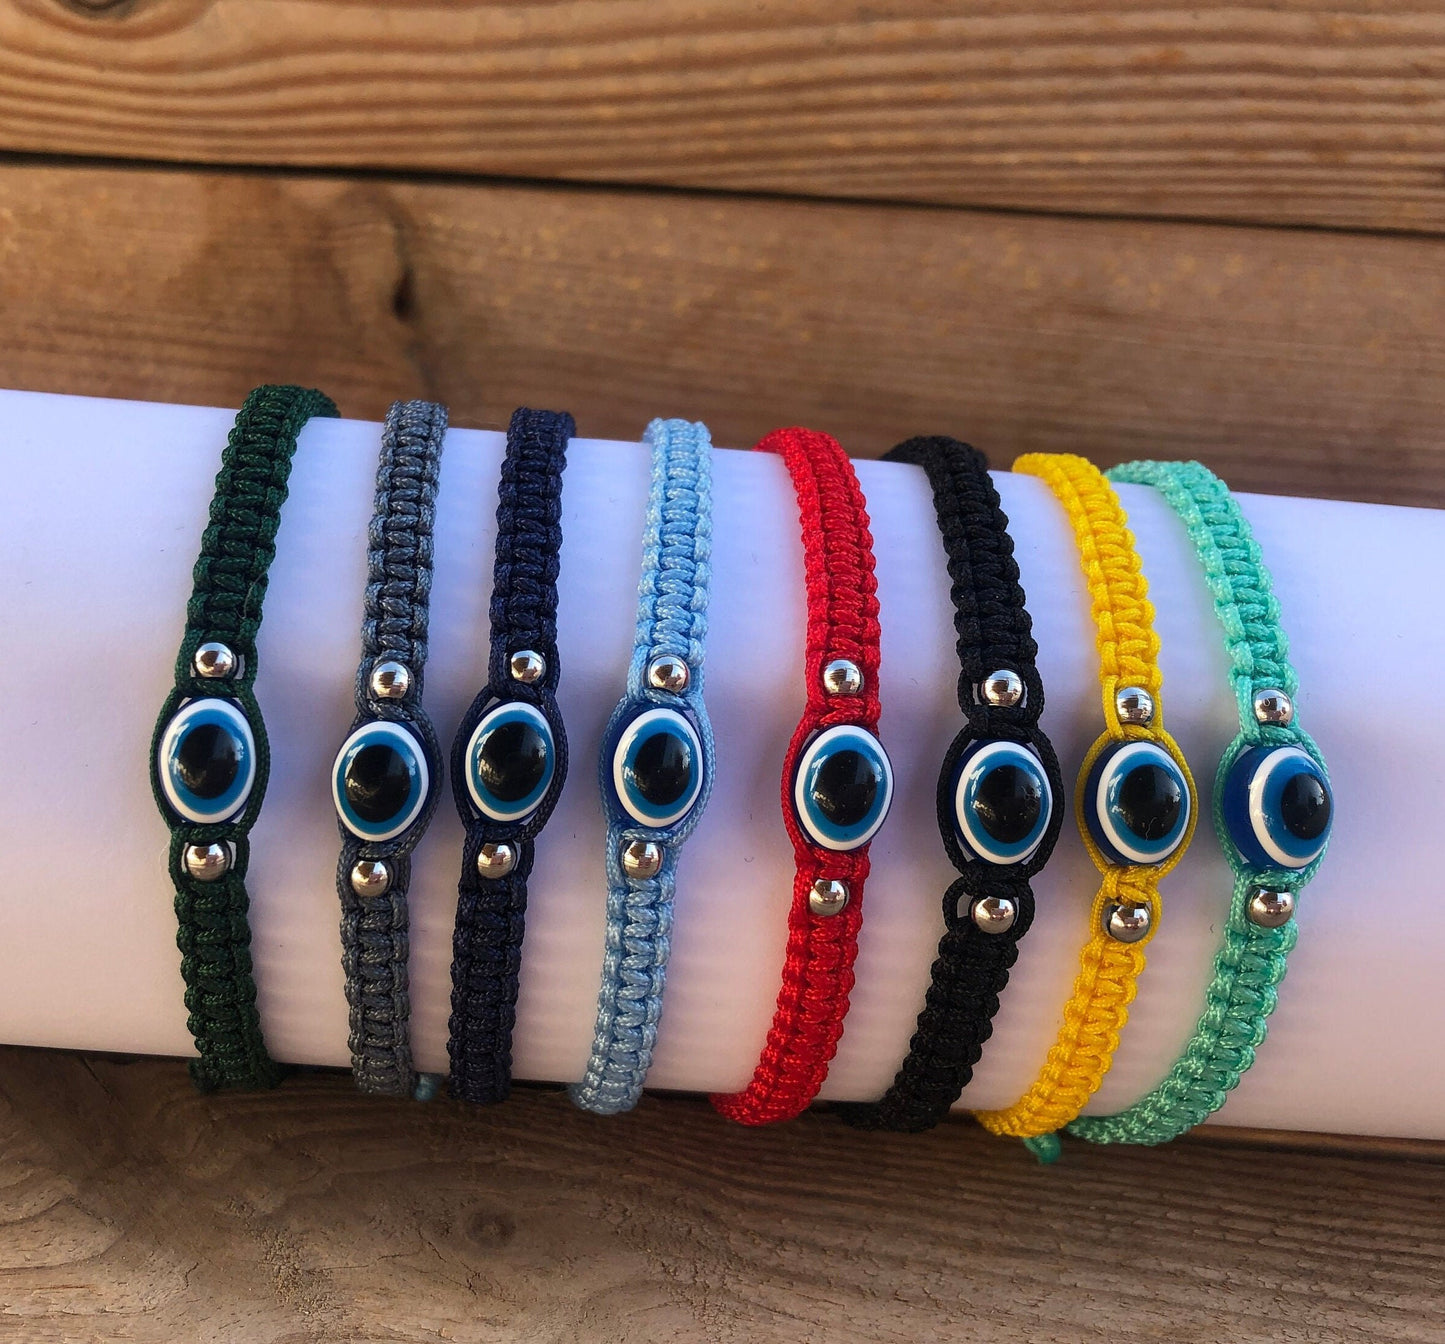 Evil eye protection bracelet - gift for him or for her - many colors available